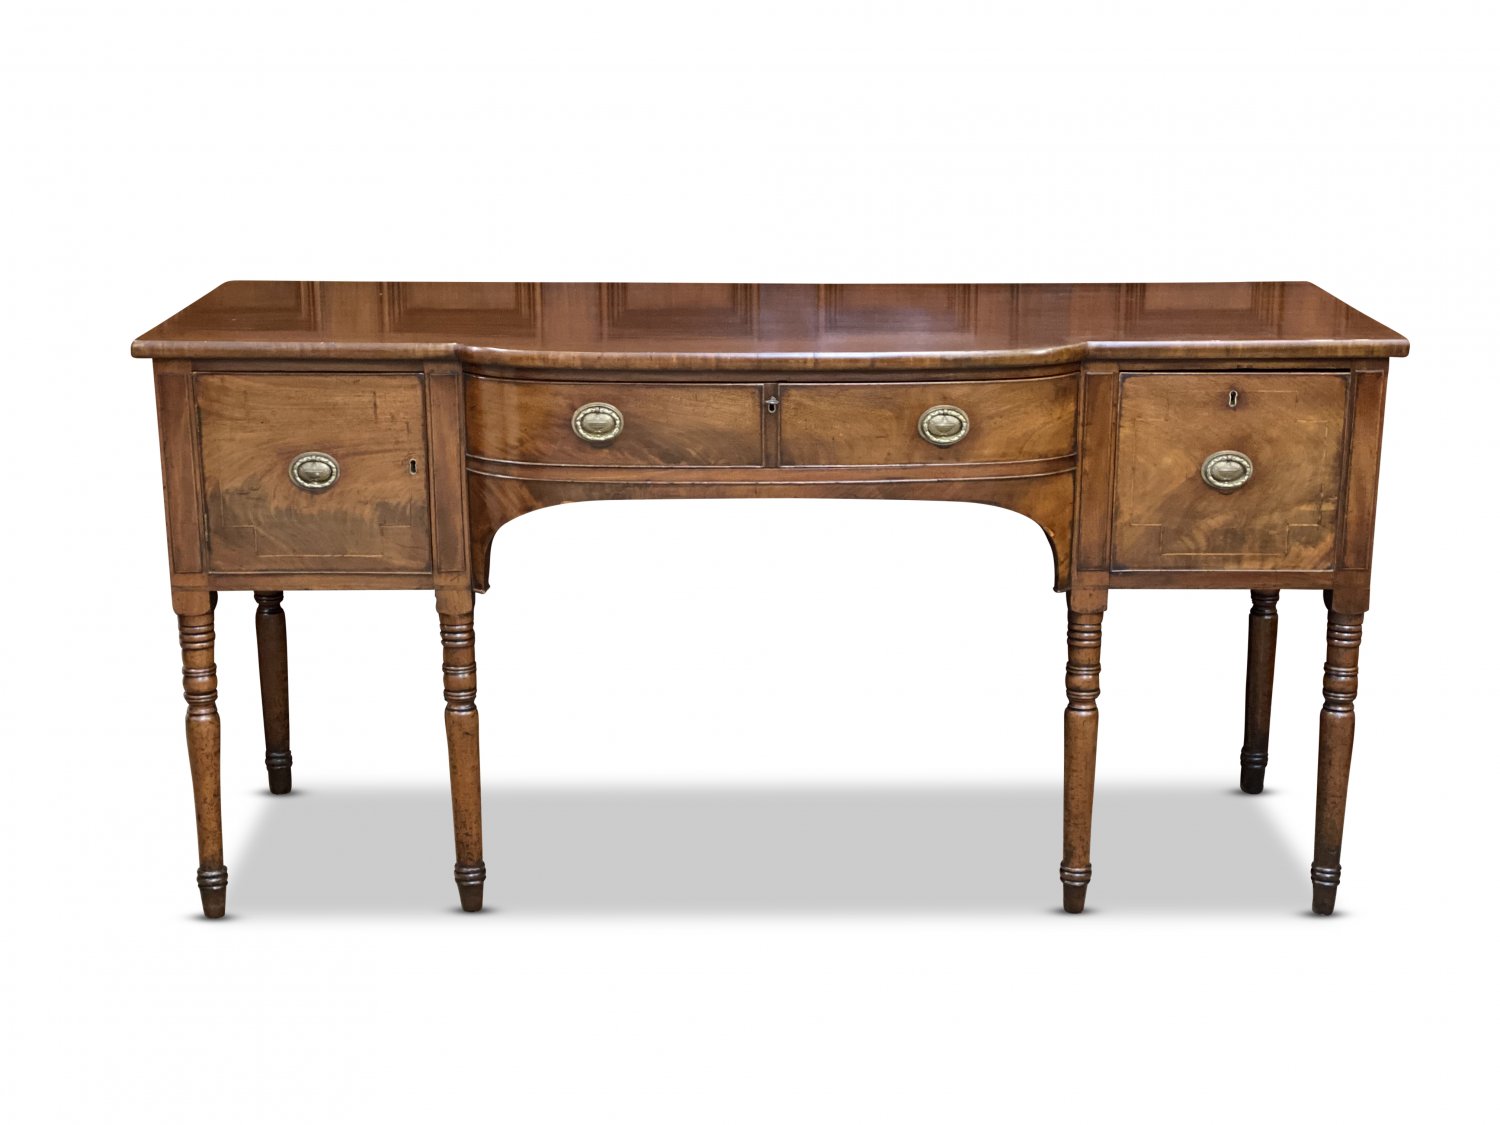 Fine quality George III mahogany two-door bow front sideboard with central drawer